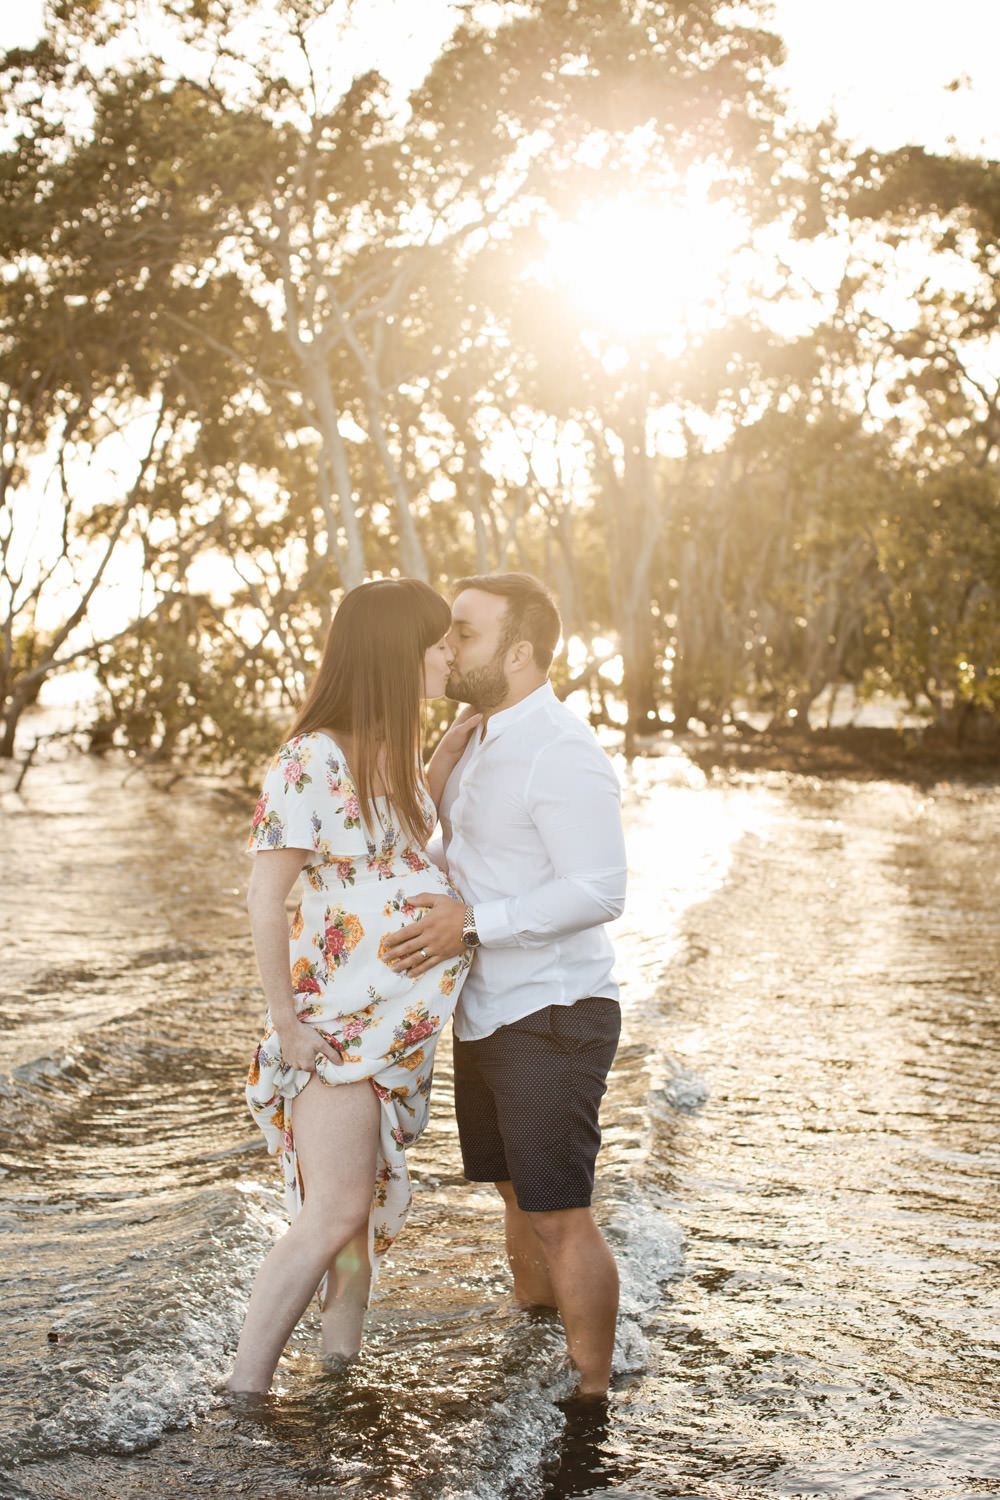 maternity-session-at-sunrise-athebeach-mother-and-newborn-baby-Natural-family with maternity-newborn-lifestyle-imagery- photography in Brisbane- QuinceandMulberry